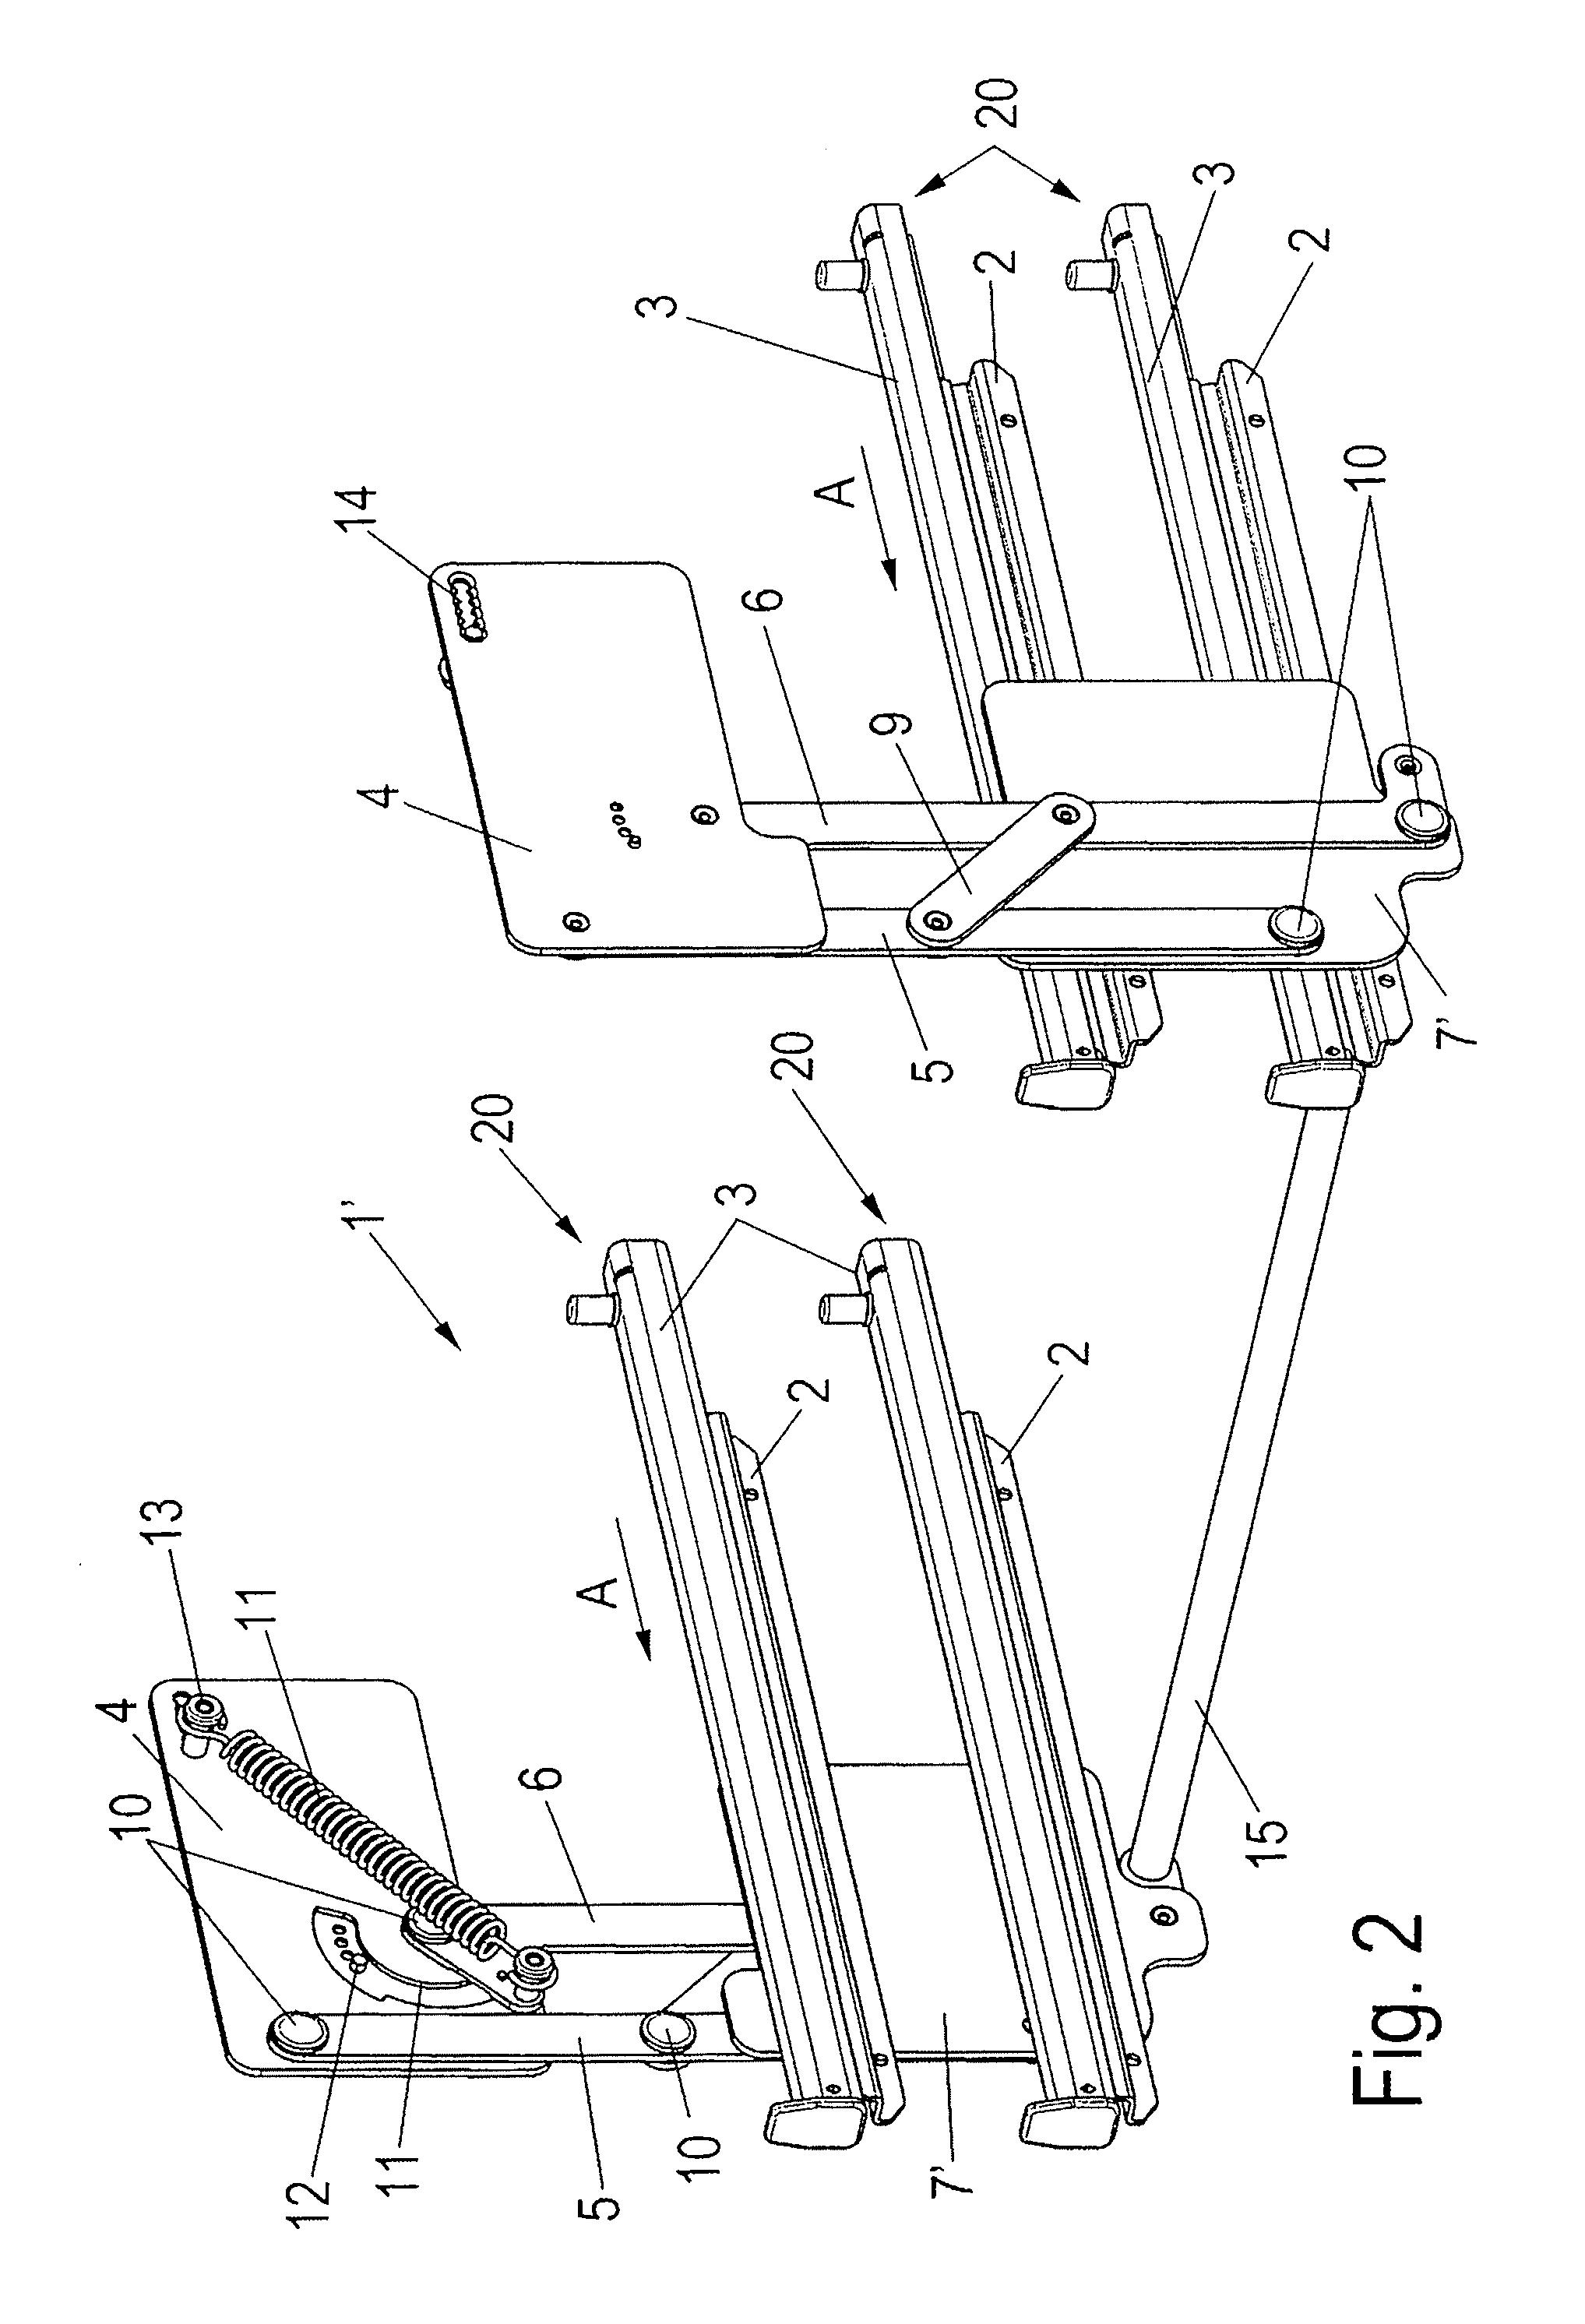 Apparatus for adjusting the height of a counter which is guided in a household device by way of at least one pull-out guide